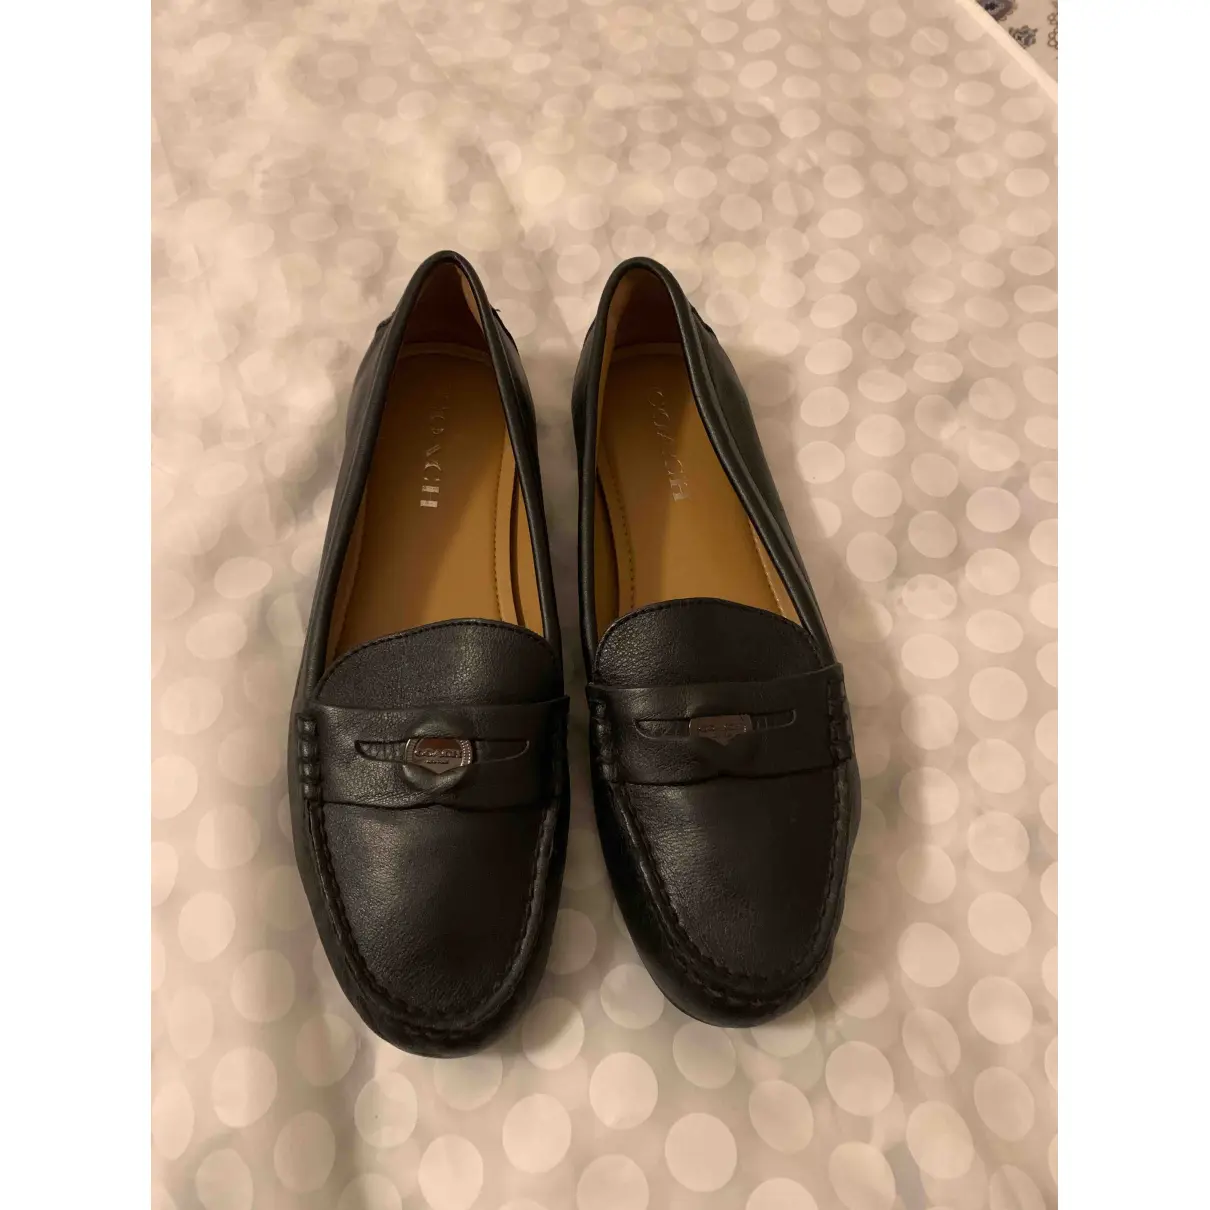 Buy Coach Leather flats online